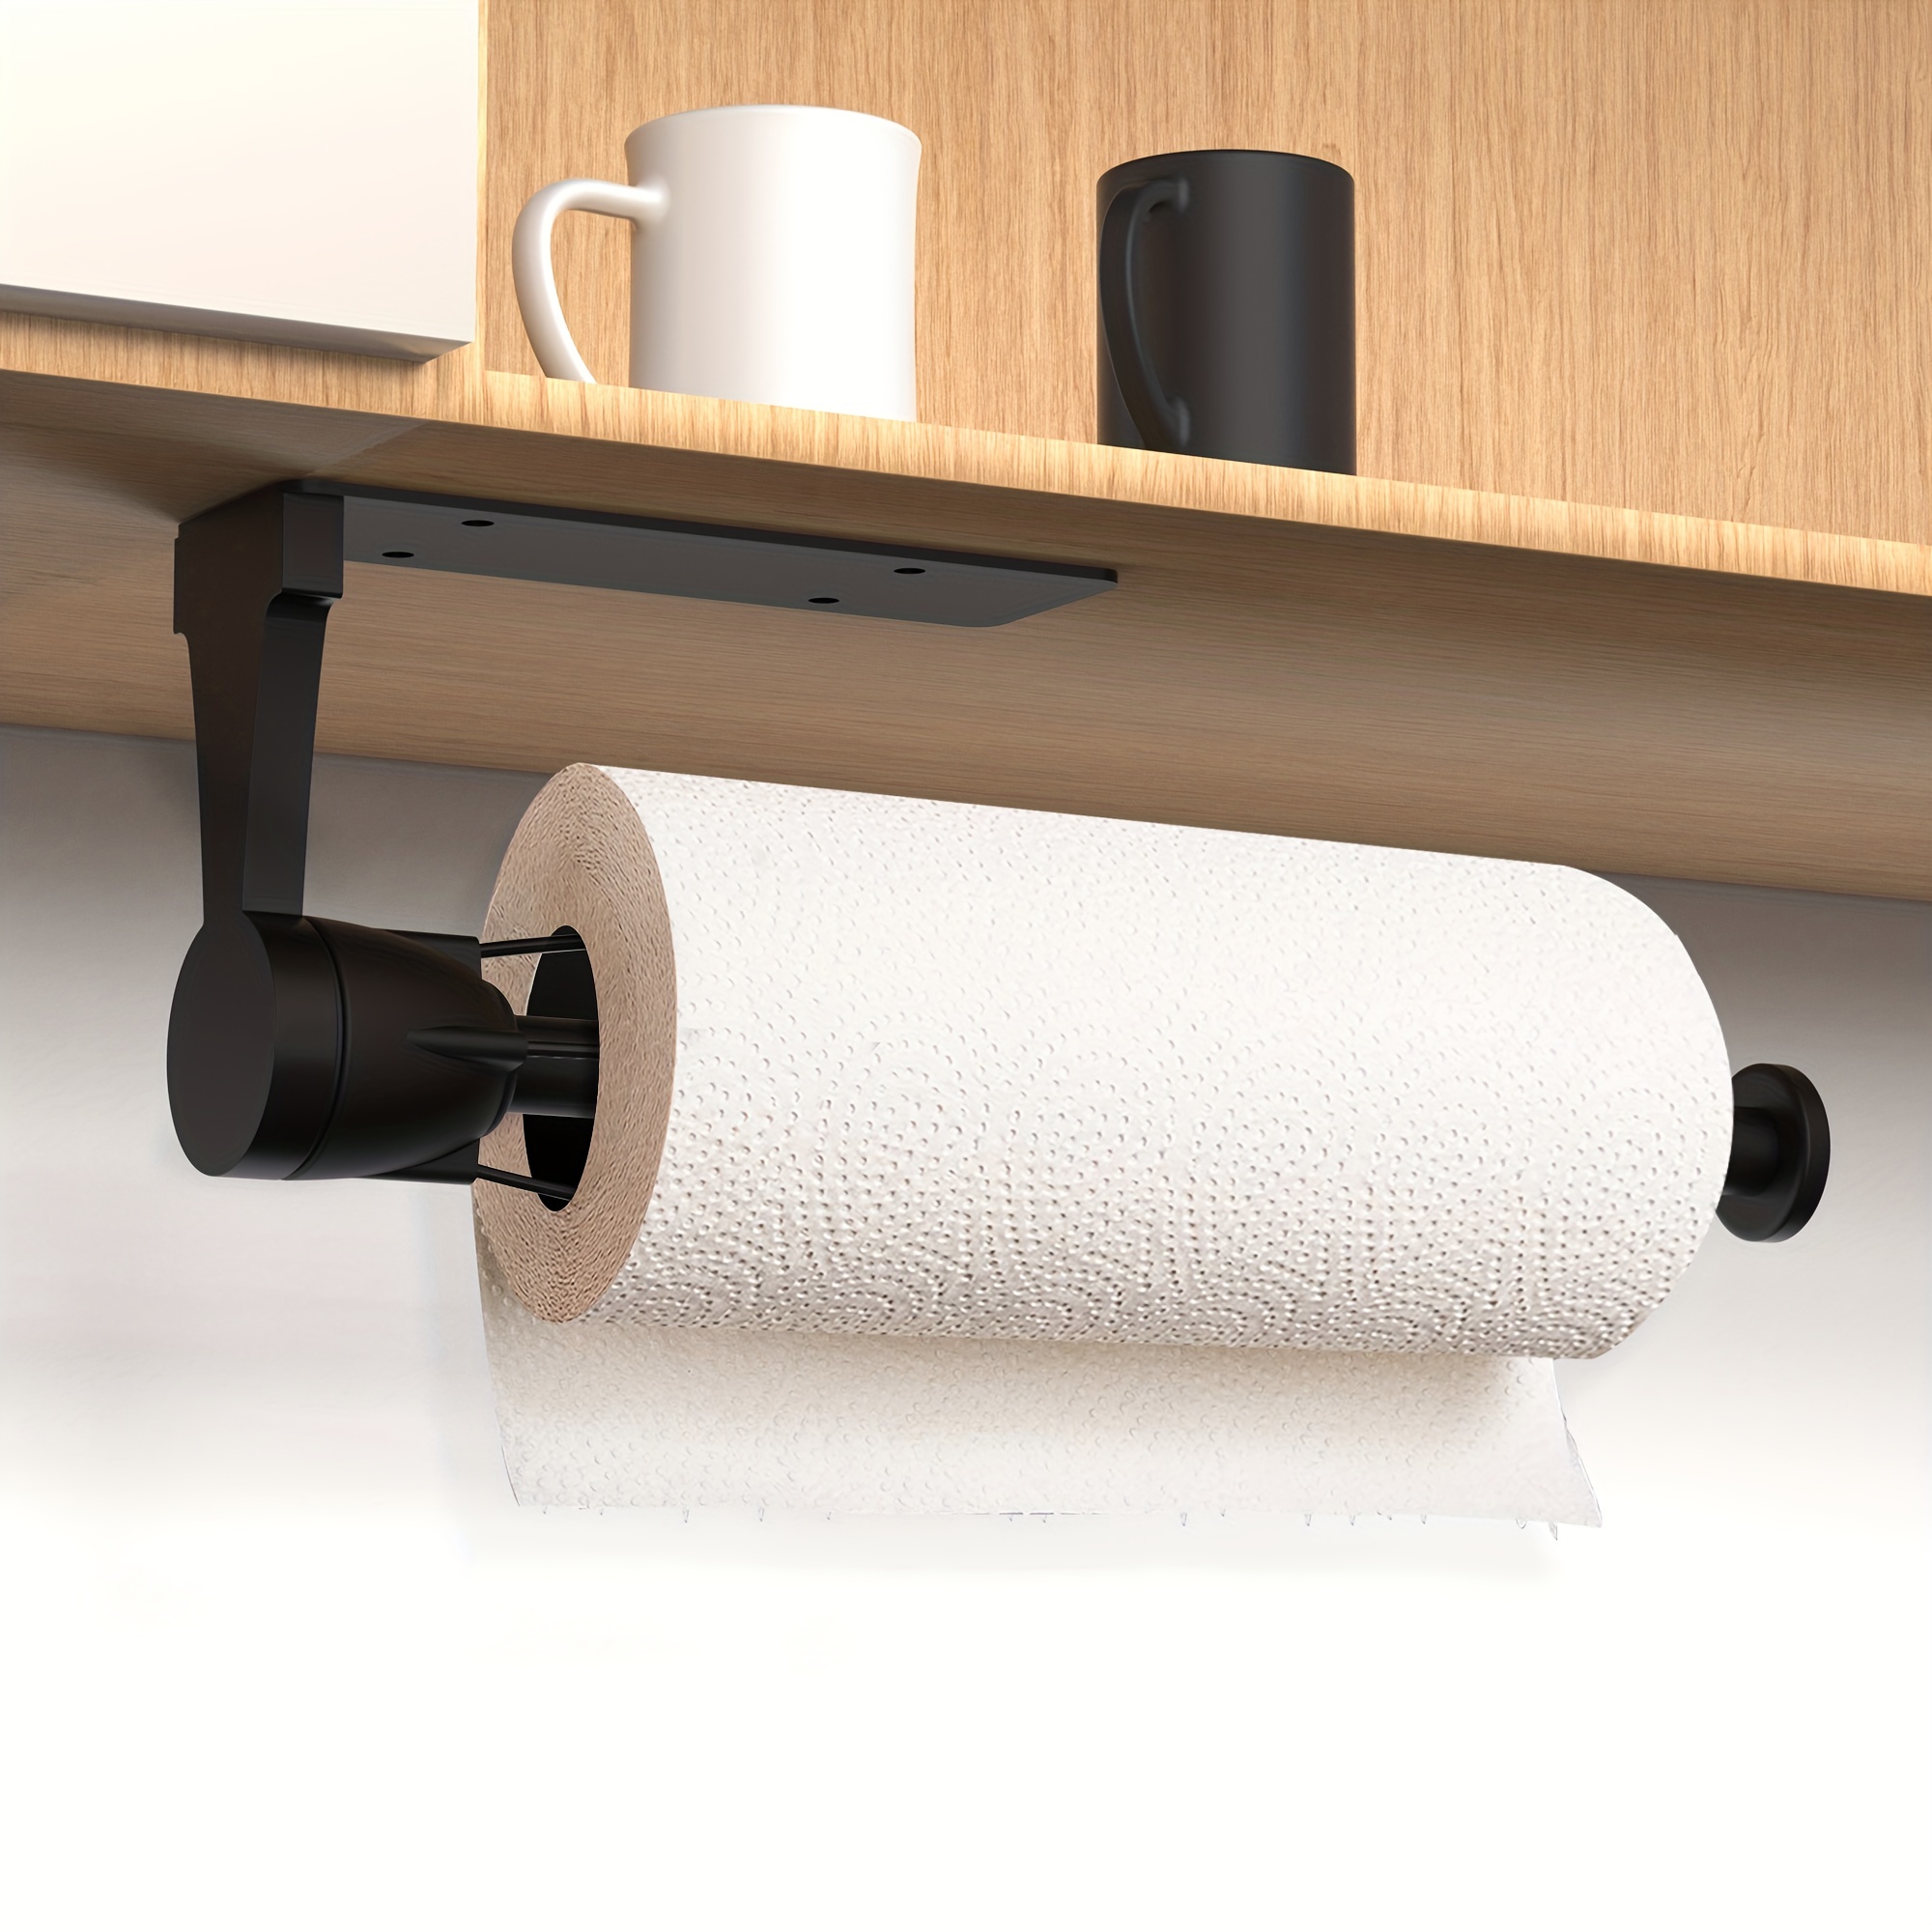 VEHHE Kitchen Roll Holder Under Cabinet Black-Self Adhesive or Drilling Kitchen  Roll Holder Wall Mounted for Bathroom or Kitchen